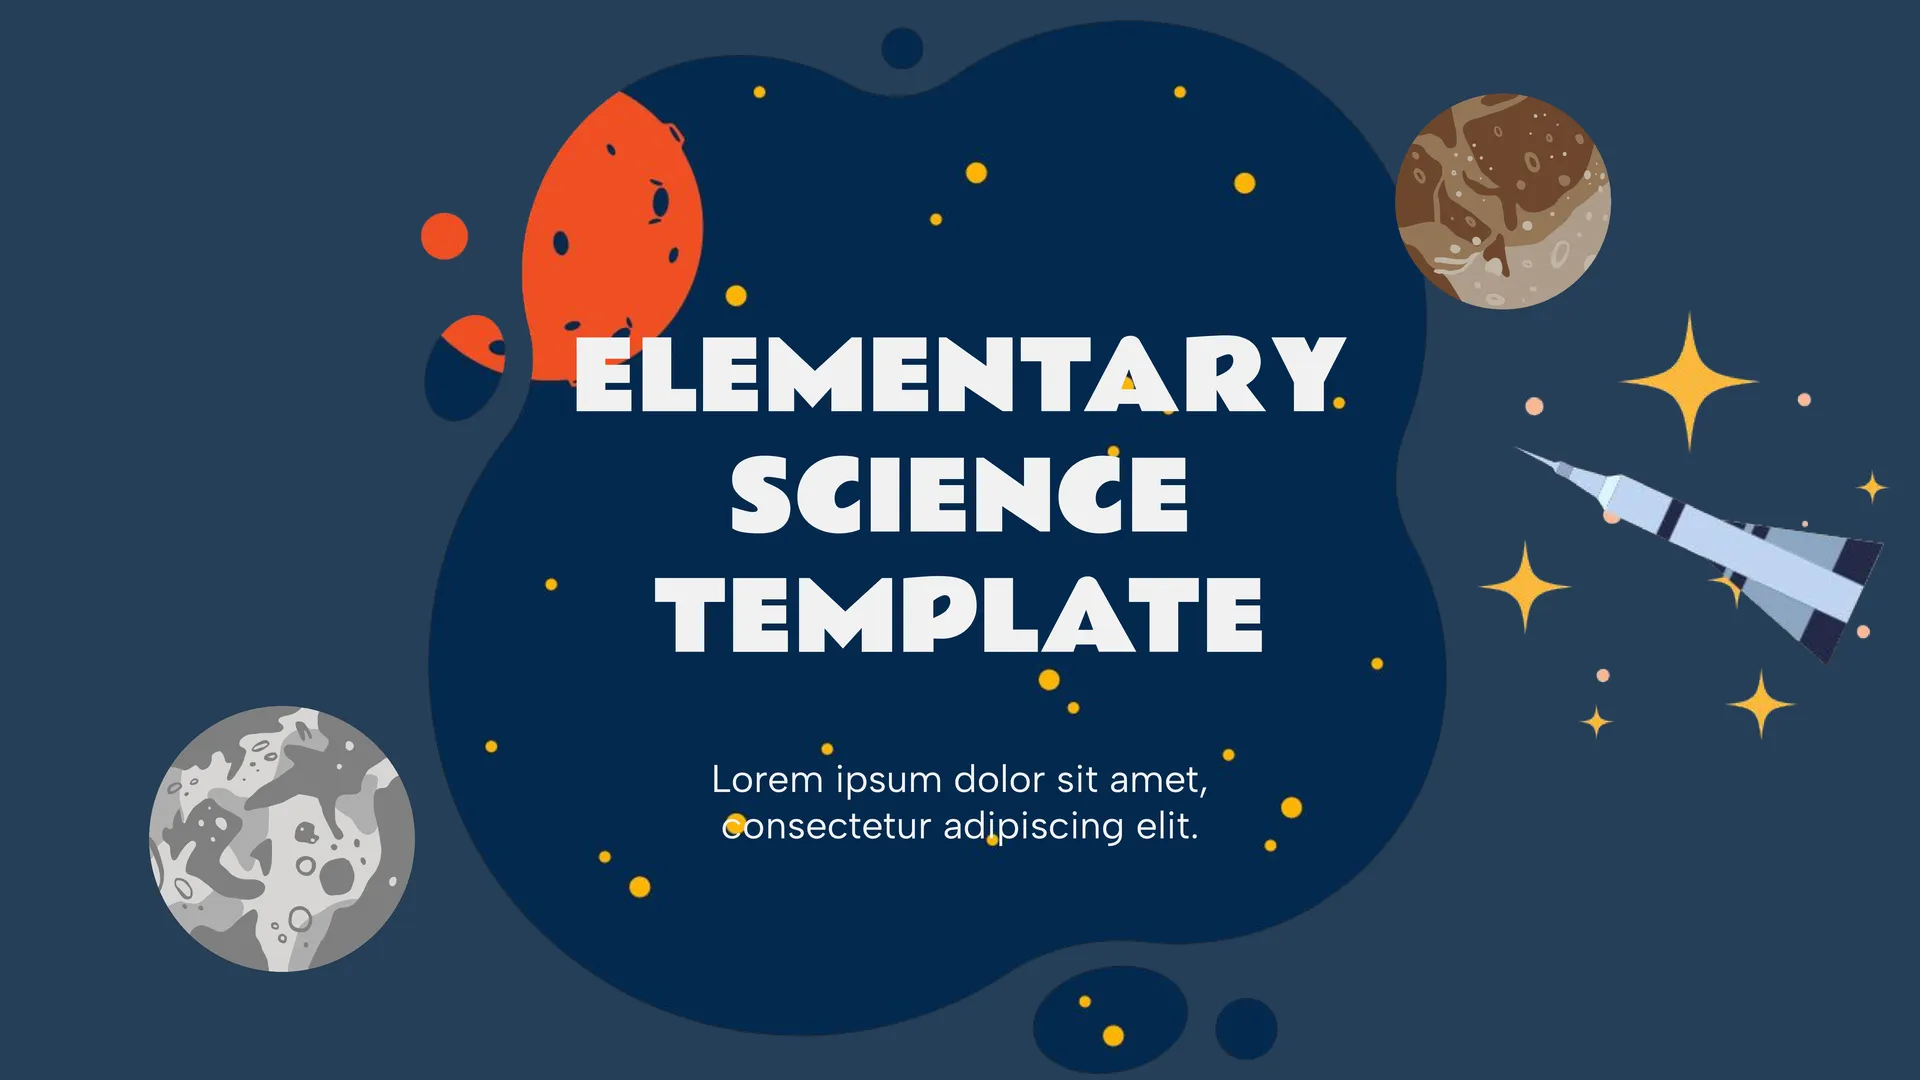 Elementary Science Template